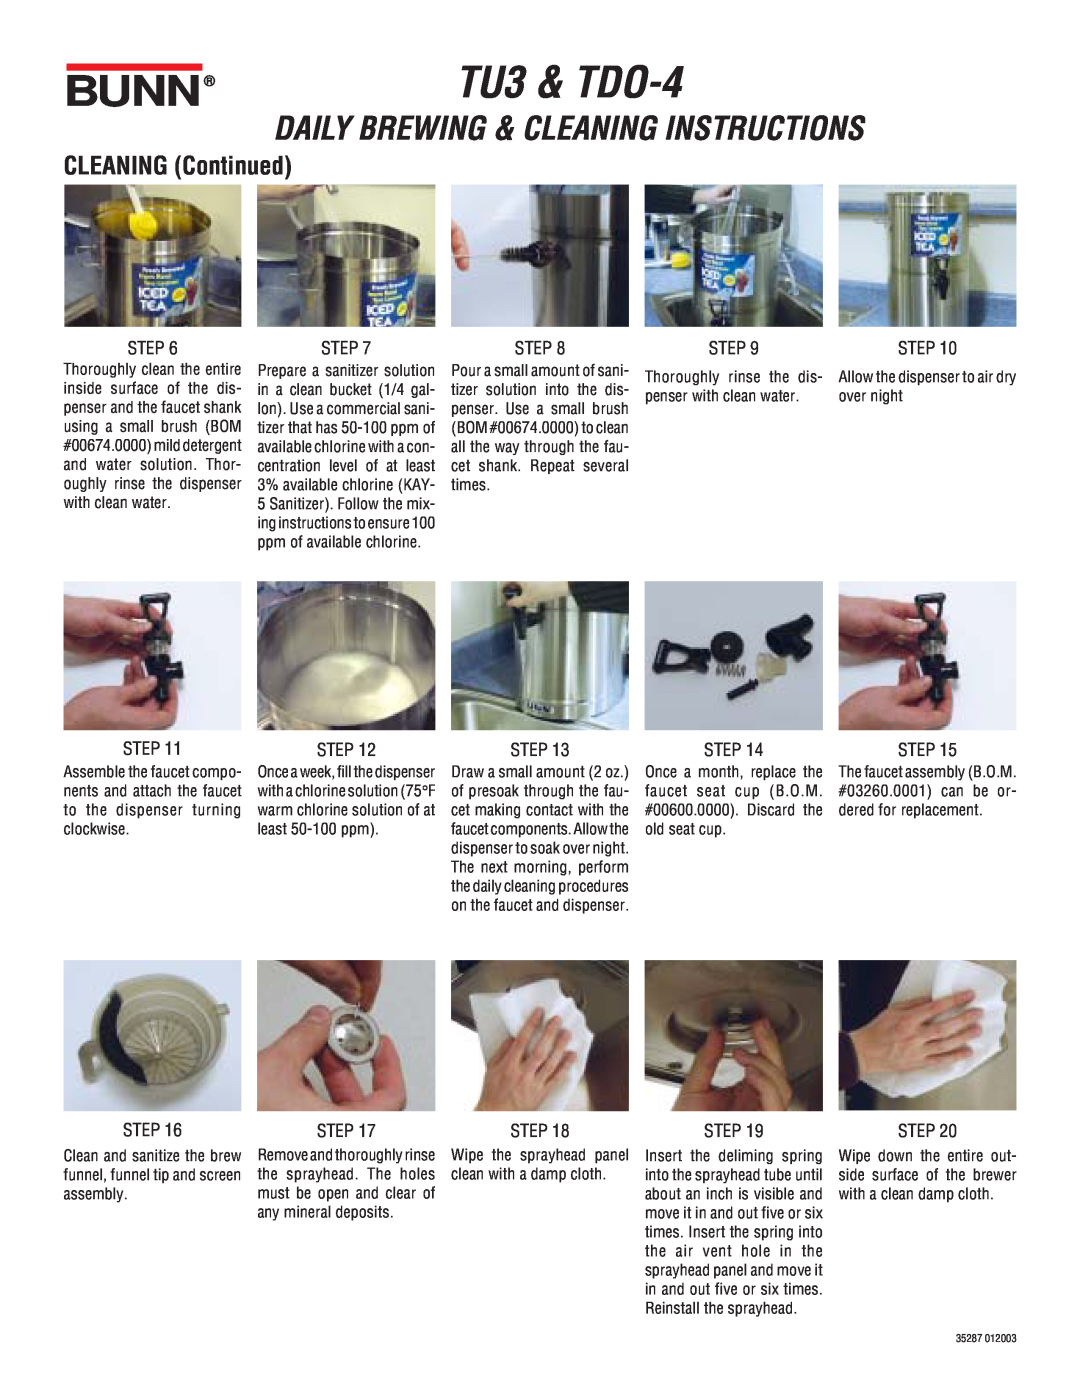 Bunn manual CLEANING Continued, Bunn, TU3 & TDO-4, Daily Brewing & Cleaning Instructions, Step 